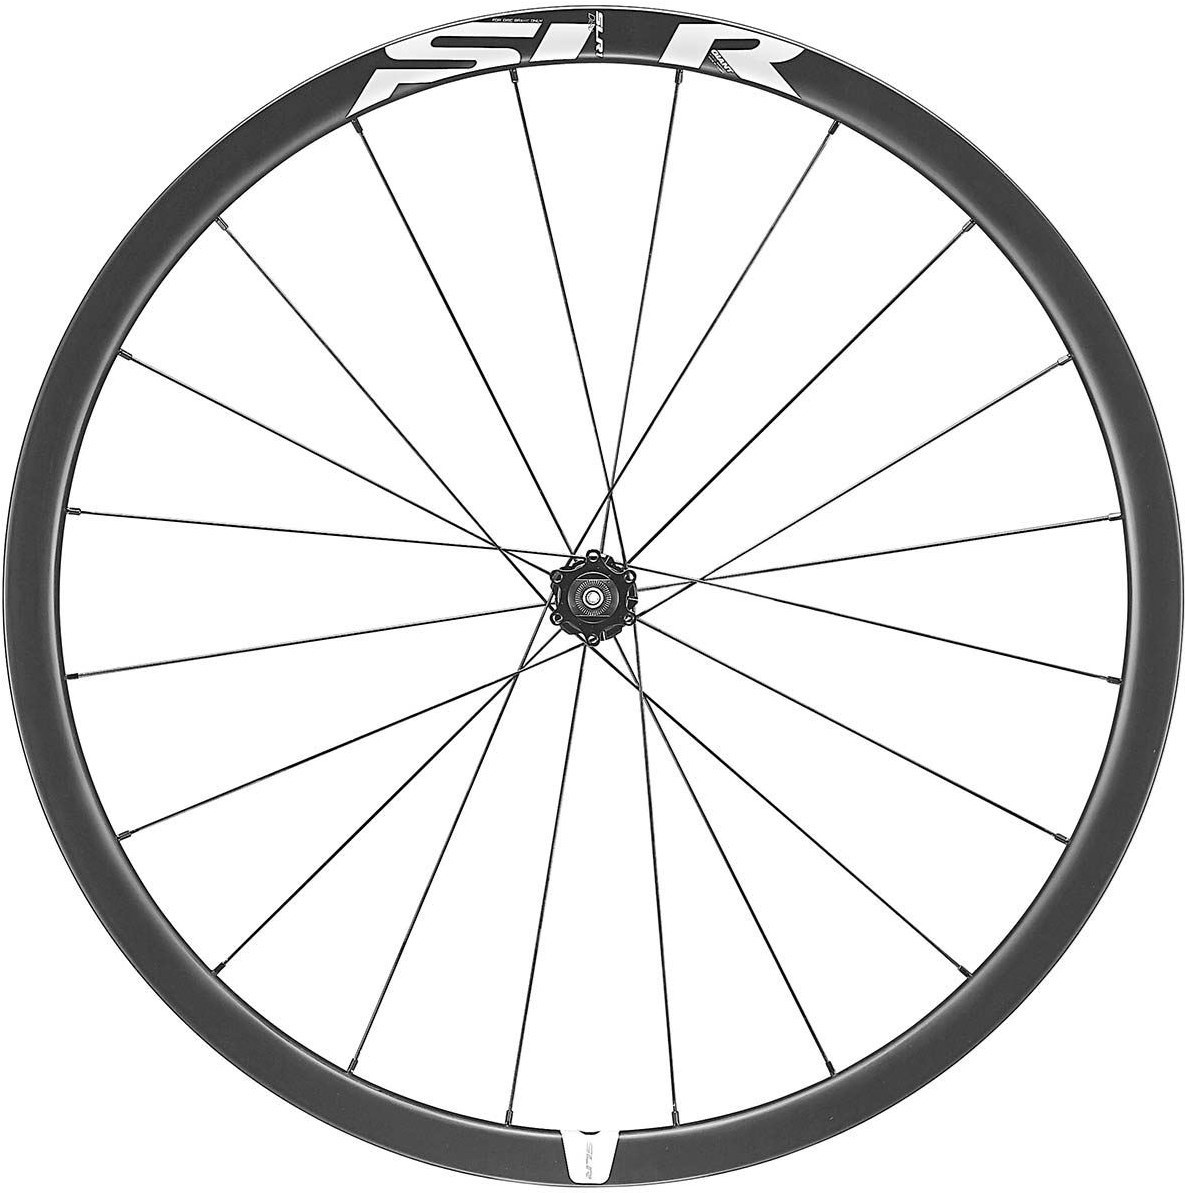 Giant SLR 1 Disc Front Road Wheel product image